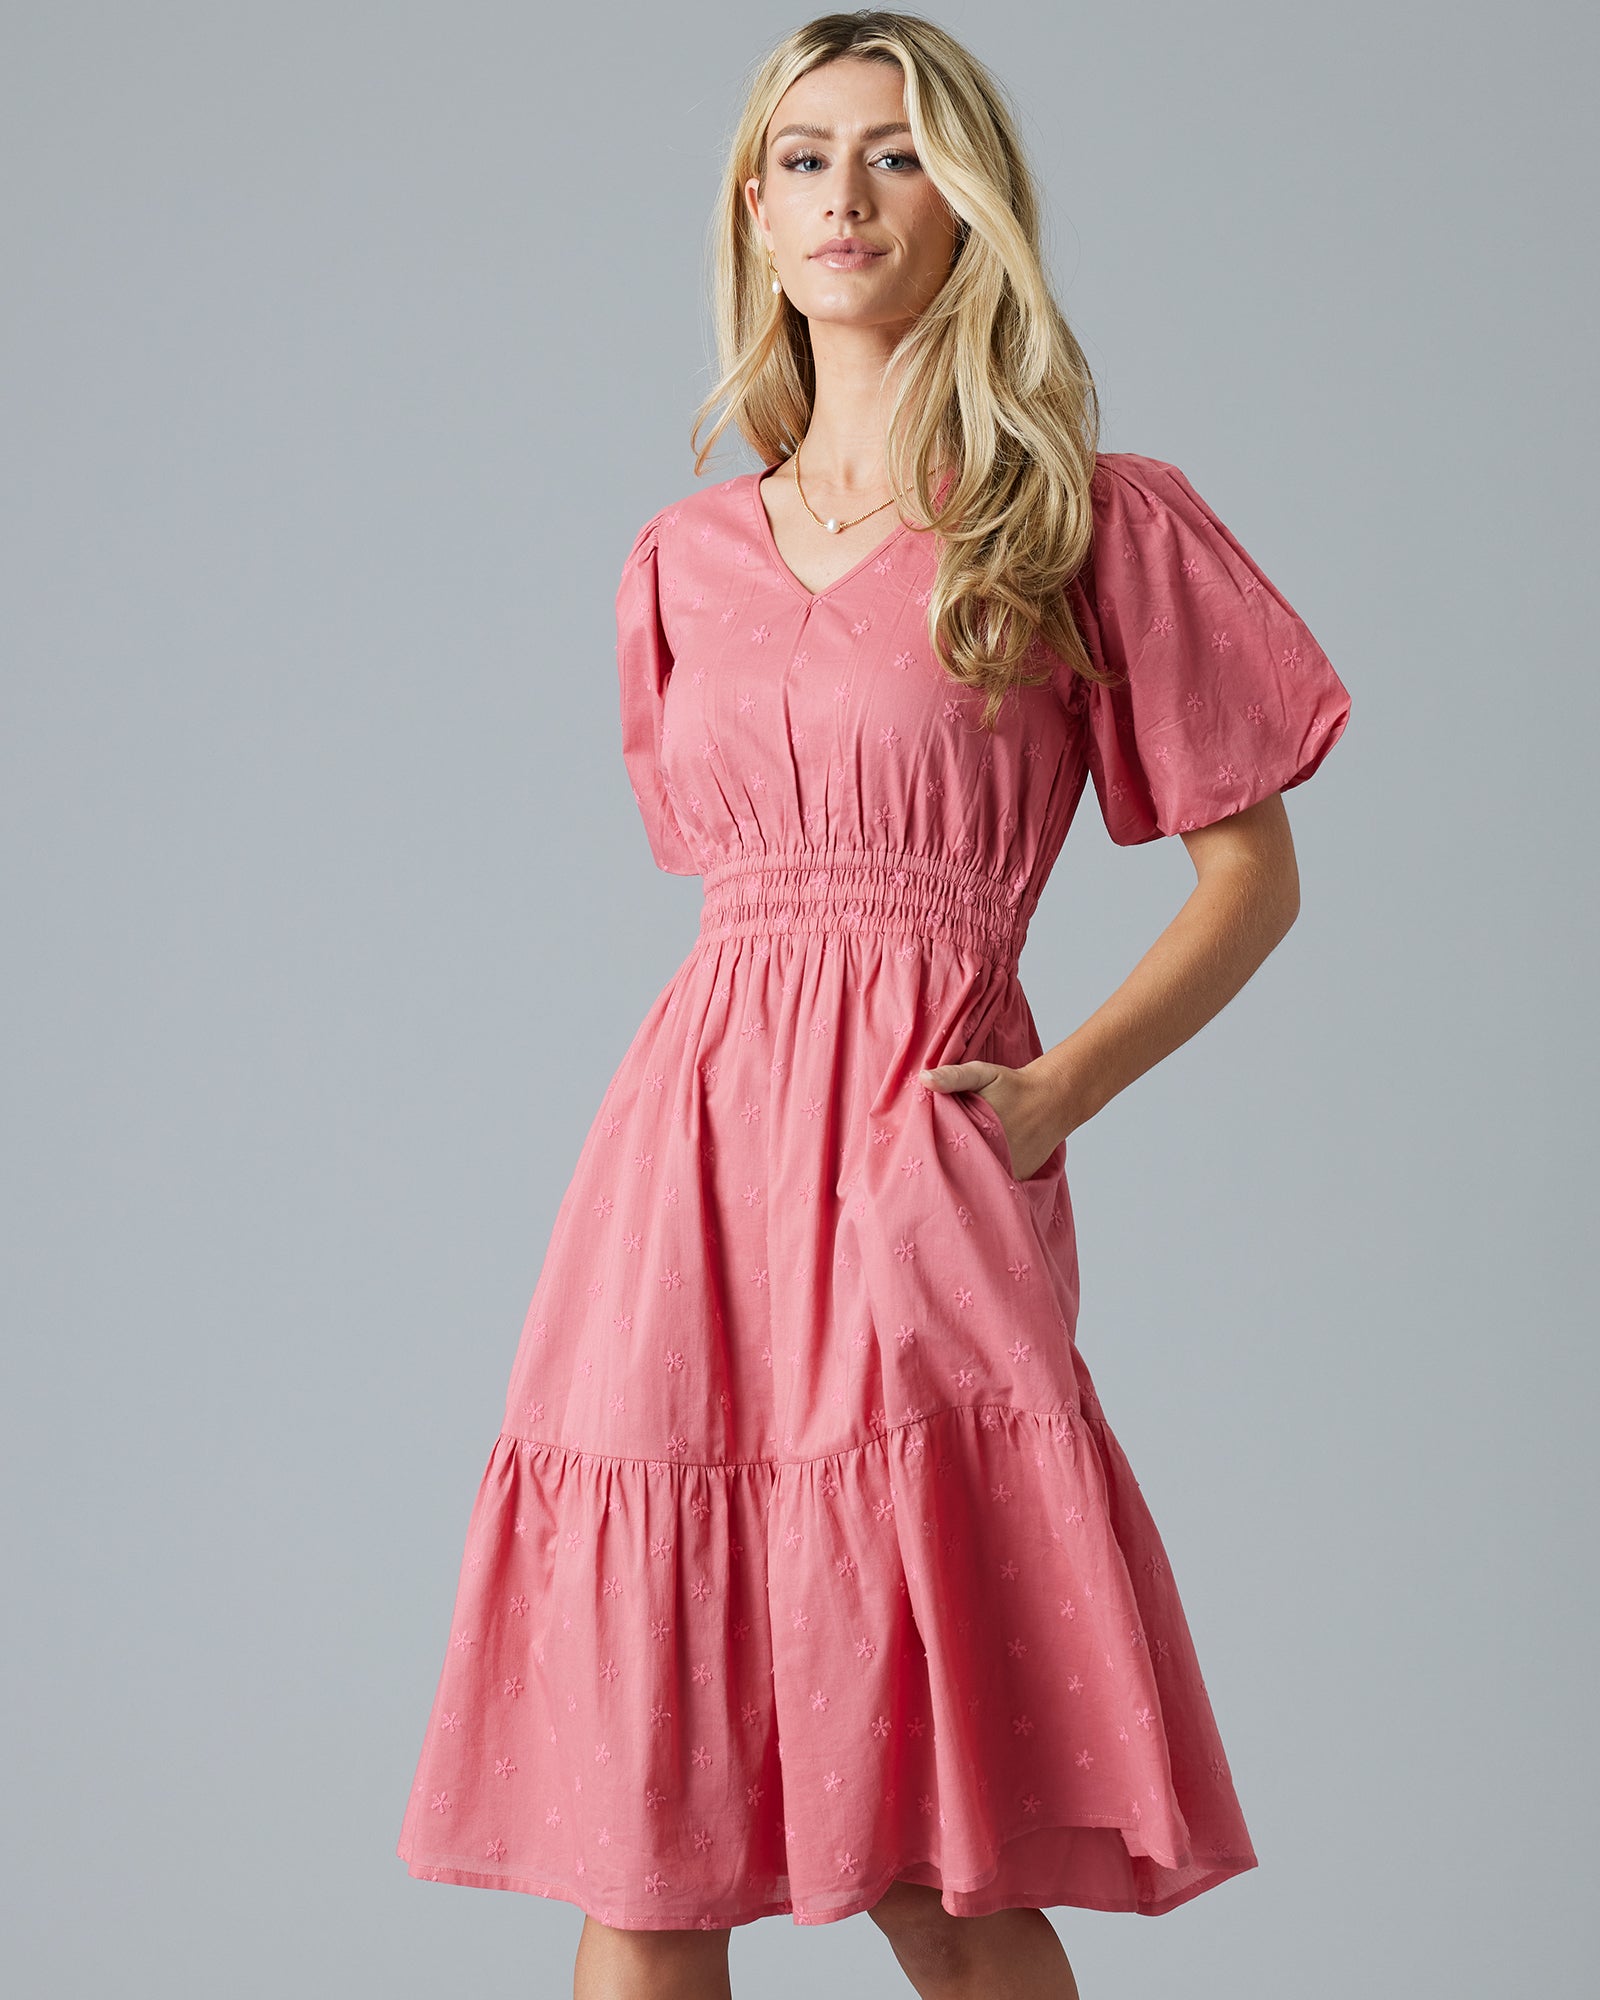 Woman in a rose color, embroidered, short sleeve knee-length dress